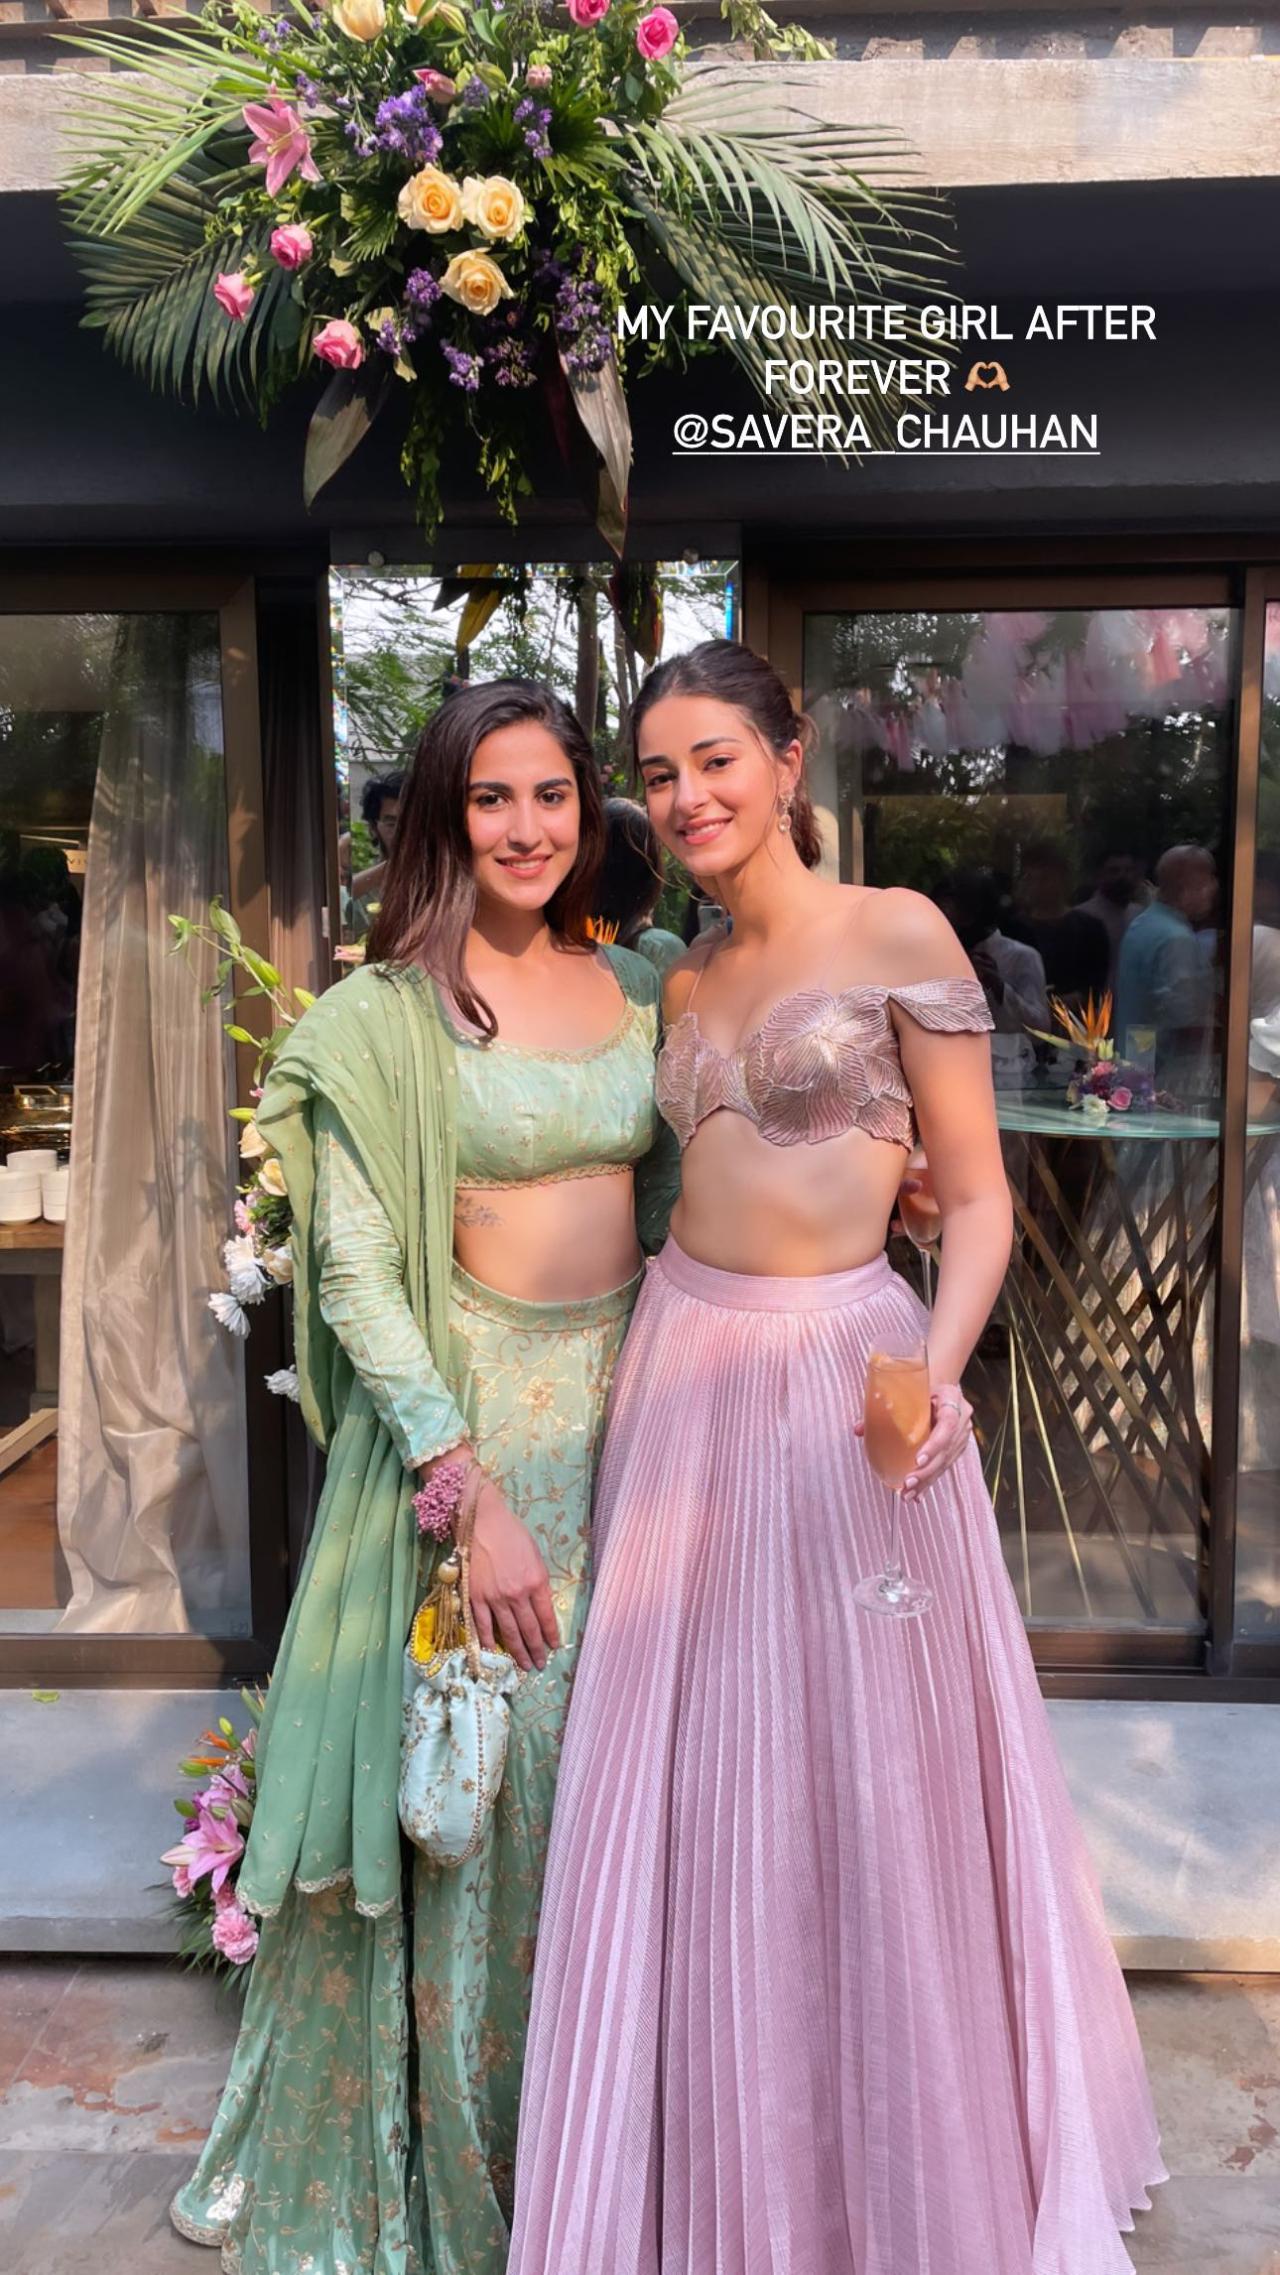 The mehendi ceremony is taking place in Mumbai at actor Sohail Khan's house. Several Bollywood celebs attended the function including Salman Khan, Helen, Bhavana Pandey, Ahaan Panday, Bobby Deol, among others